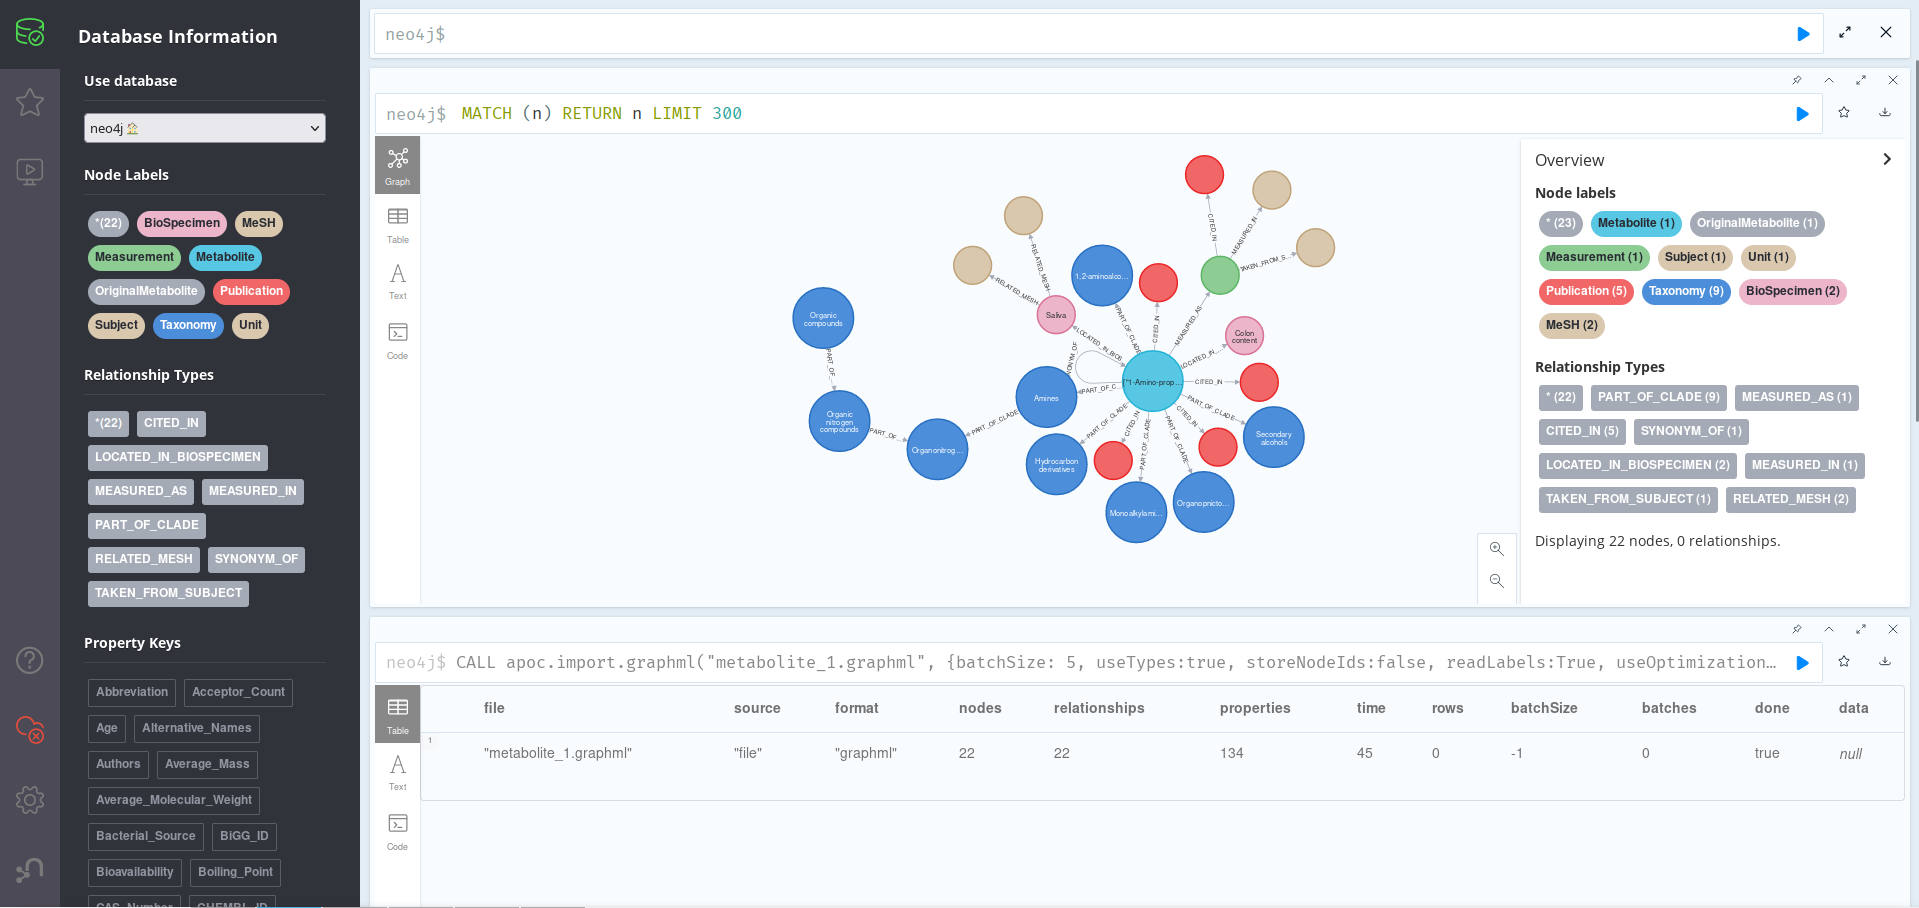 Neo4J Browser showing all the nodes present in the just-imported metabolite_1.graphml file